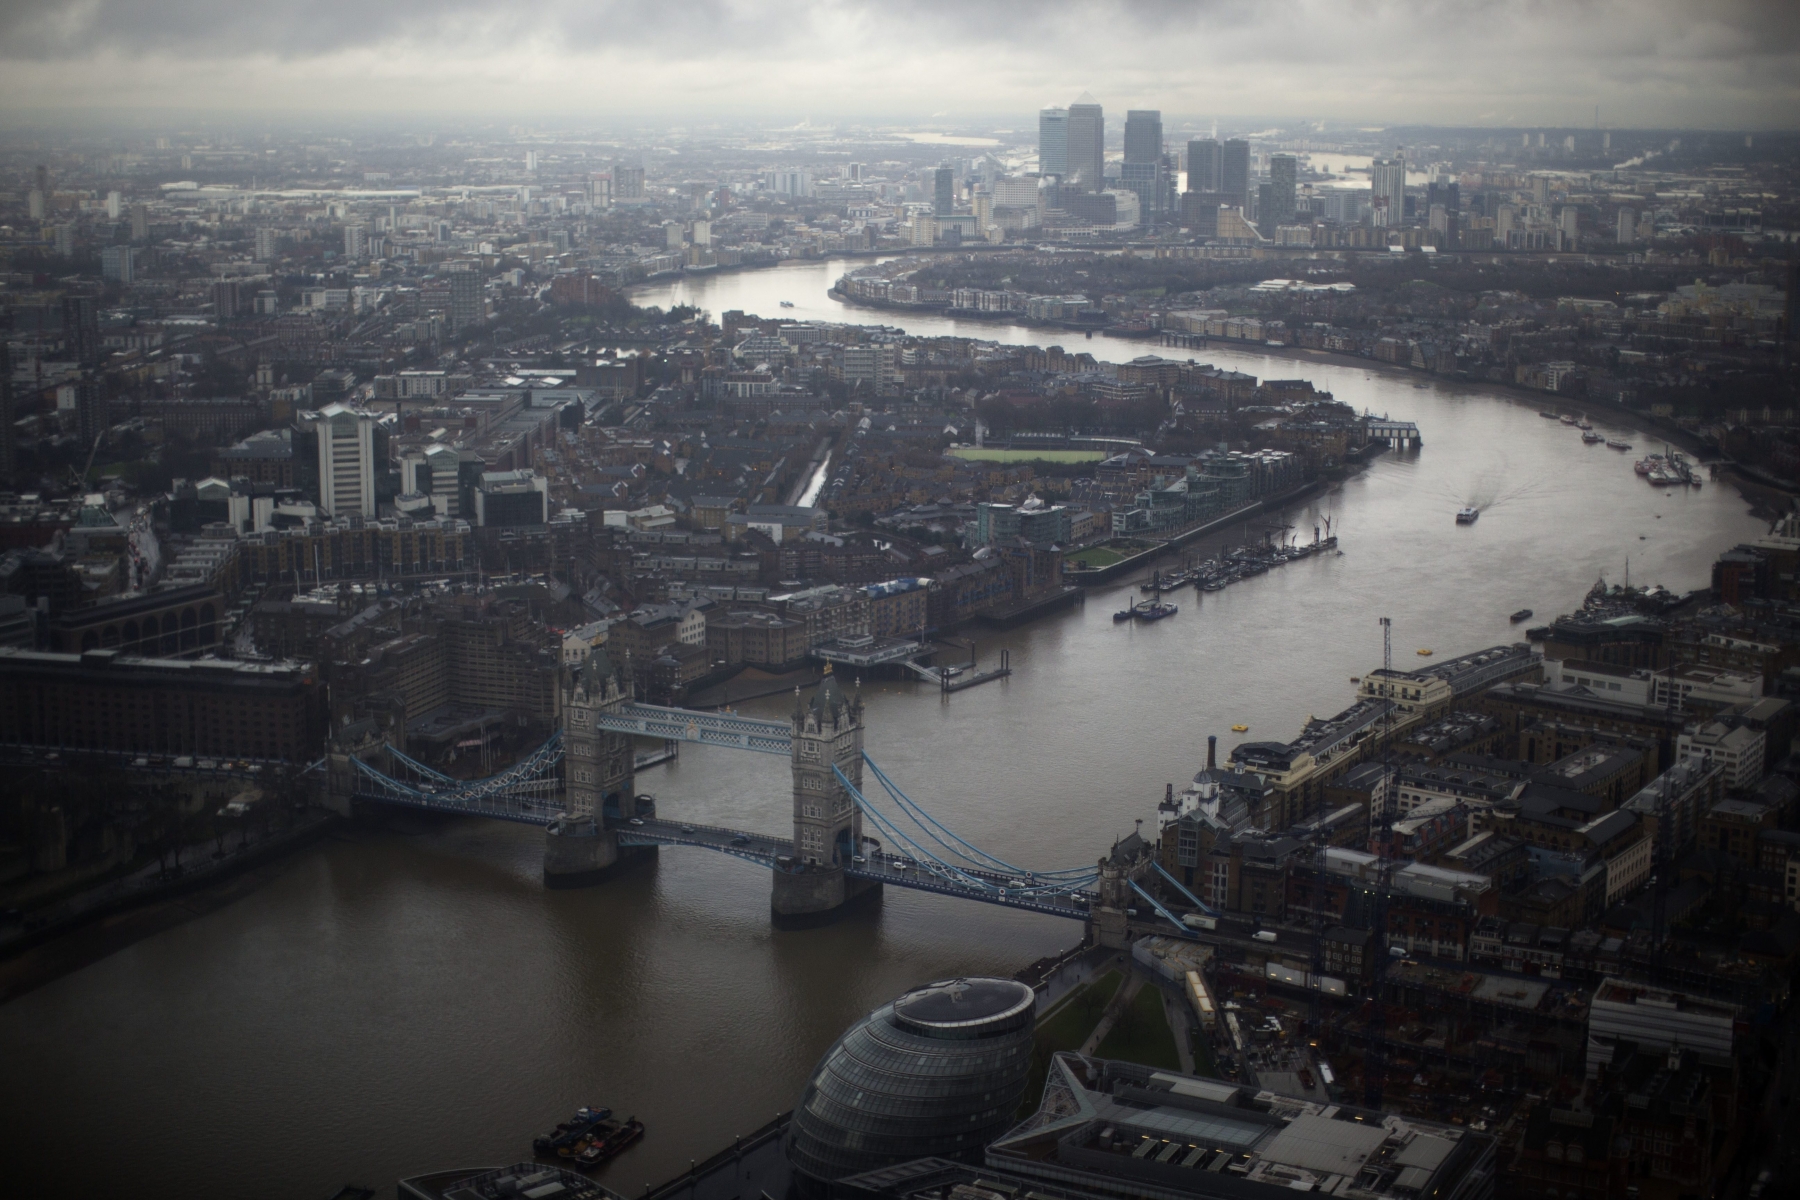 FILE - In this file photo dated Friday, Feb. 1, 2013, Tower Bridge, centre, and the Canary Wharf business district in the distance as the River Thames flows through London, are seen through a window during the official opening of "The View" viewing platform at the 95-storey Shard skyscraper in London, Friday, Feb. 1, 2013.  From the international banks in the skyscrapers of Canary Wharf to the traditional home of Britainís financial industry in the City of London, bankers and money managers across the capital are watching the upcoming June 23 referendum on EU membership with trepidation. (AP Photo/Matt Dunham, FILE) Britain EU The City